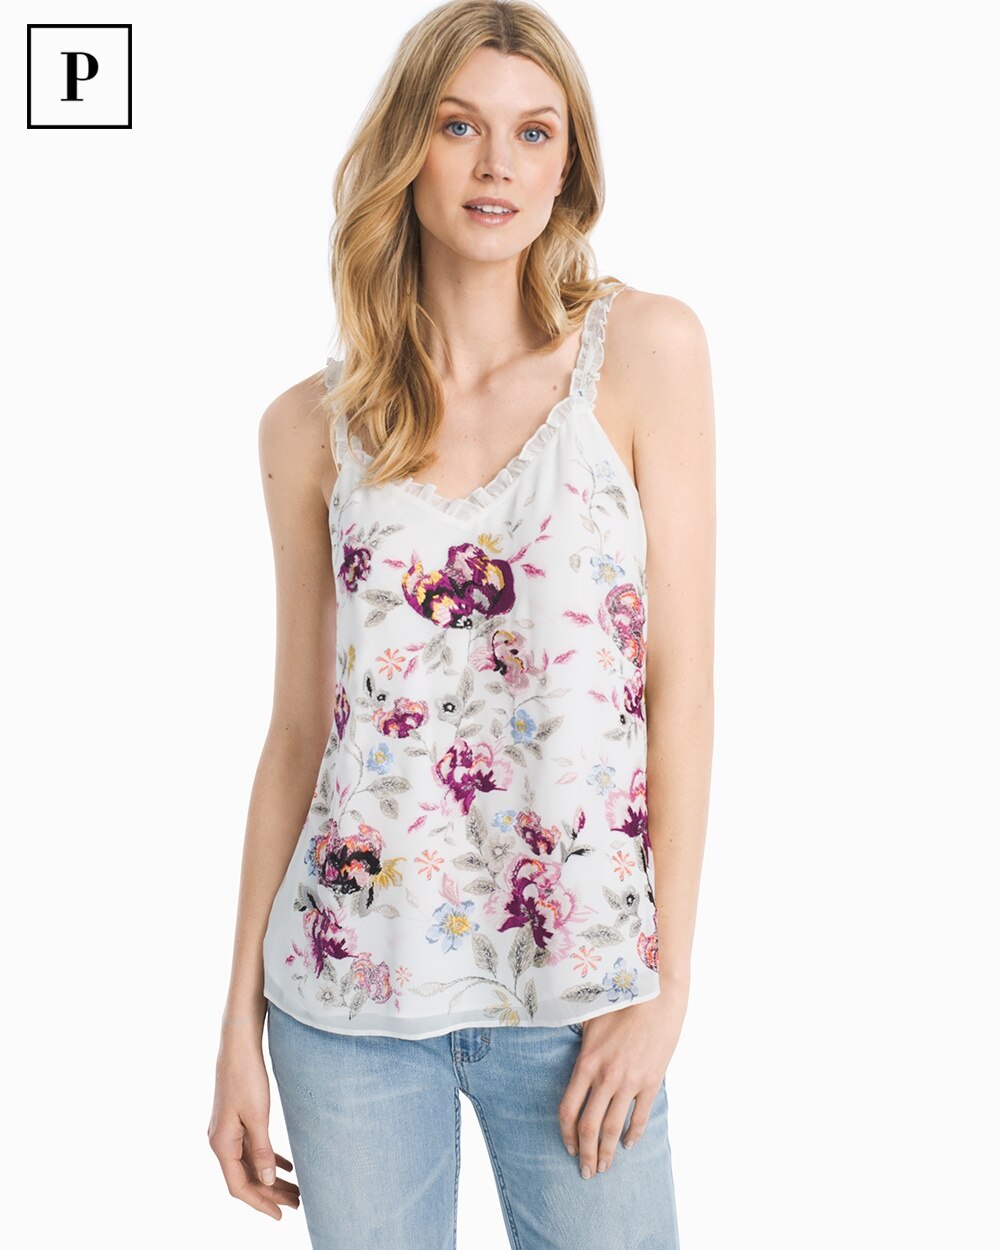 Petite Floral Embroidered Cami - WHBM